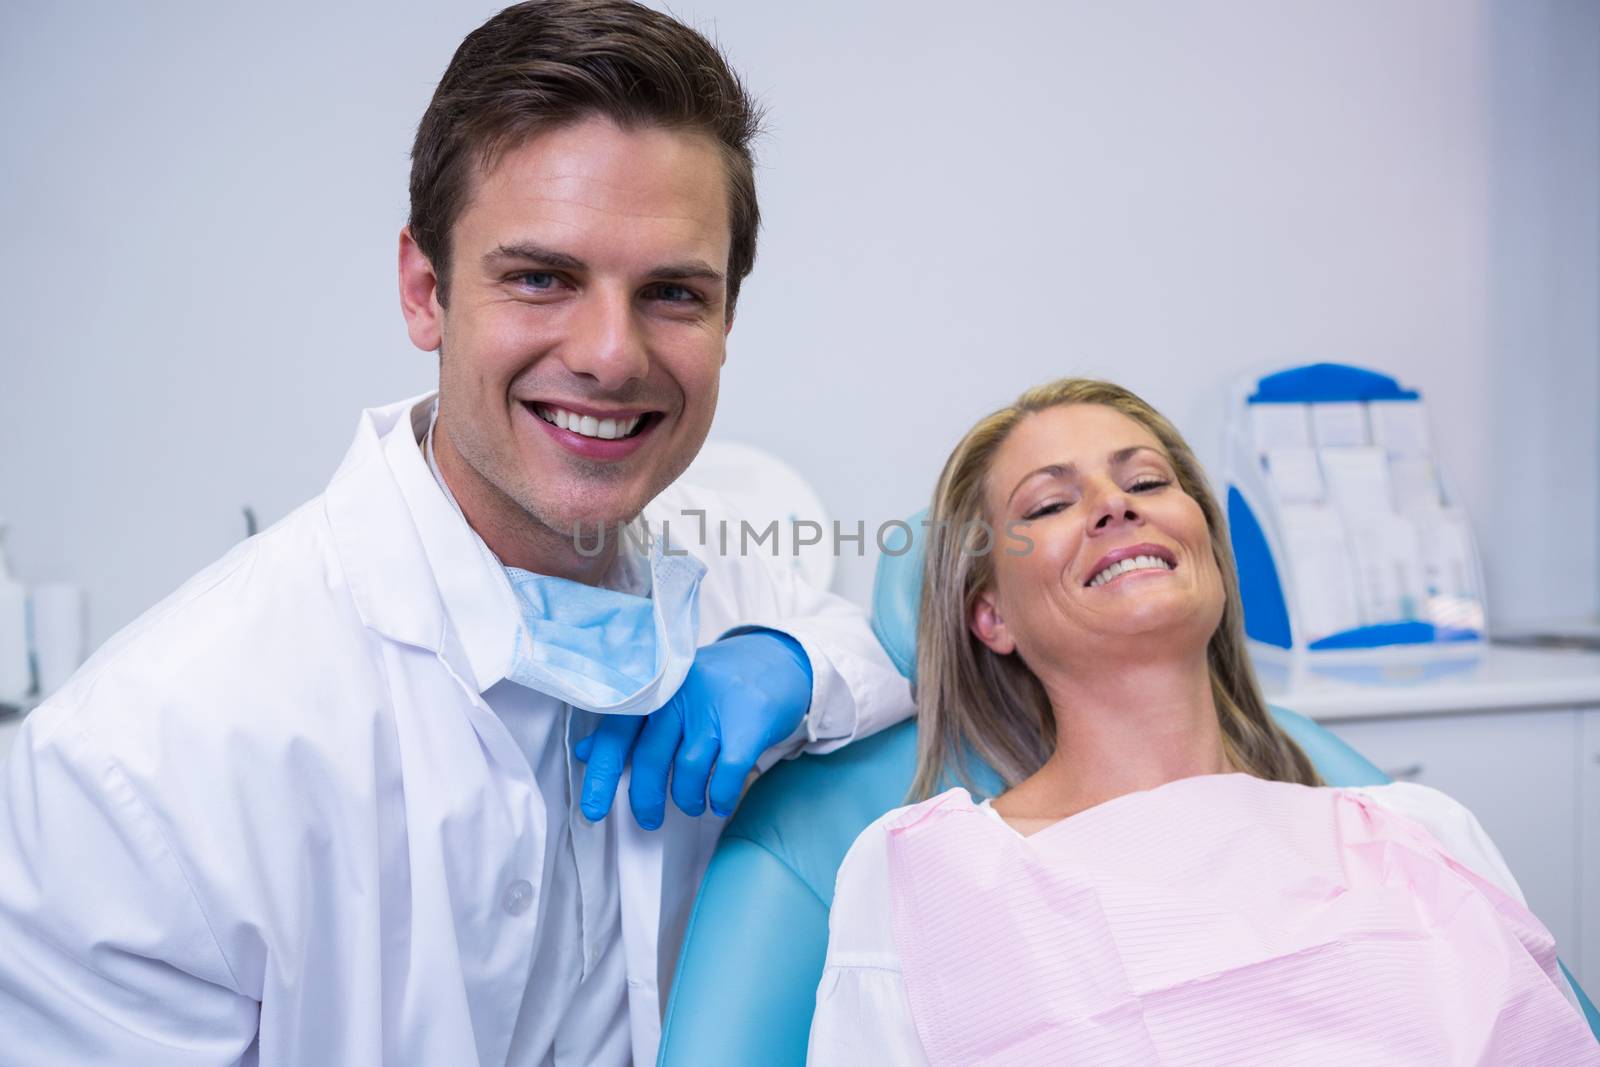 Portrait of smiling patient and dentist sitting on chair at dental clinic